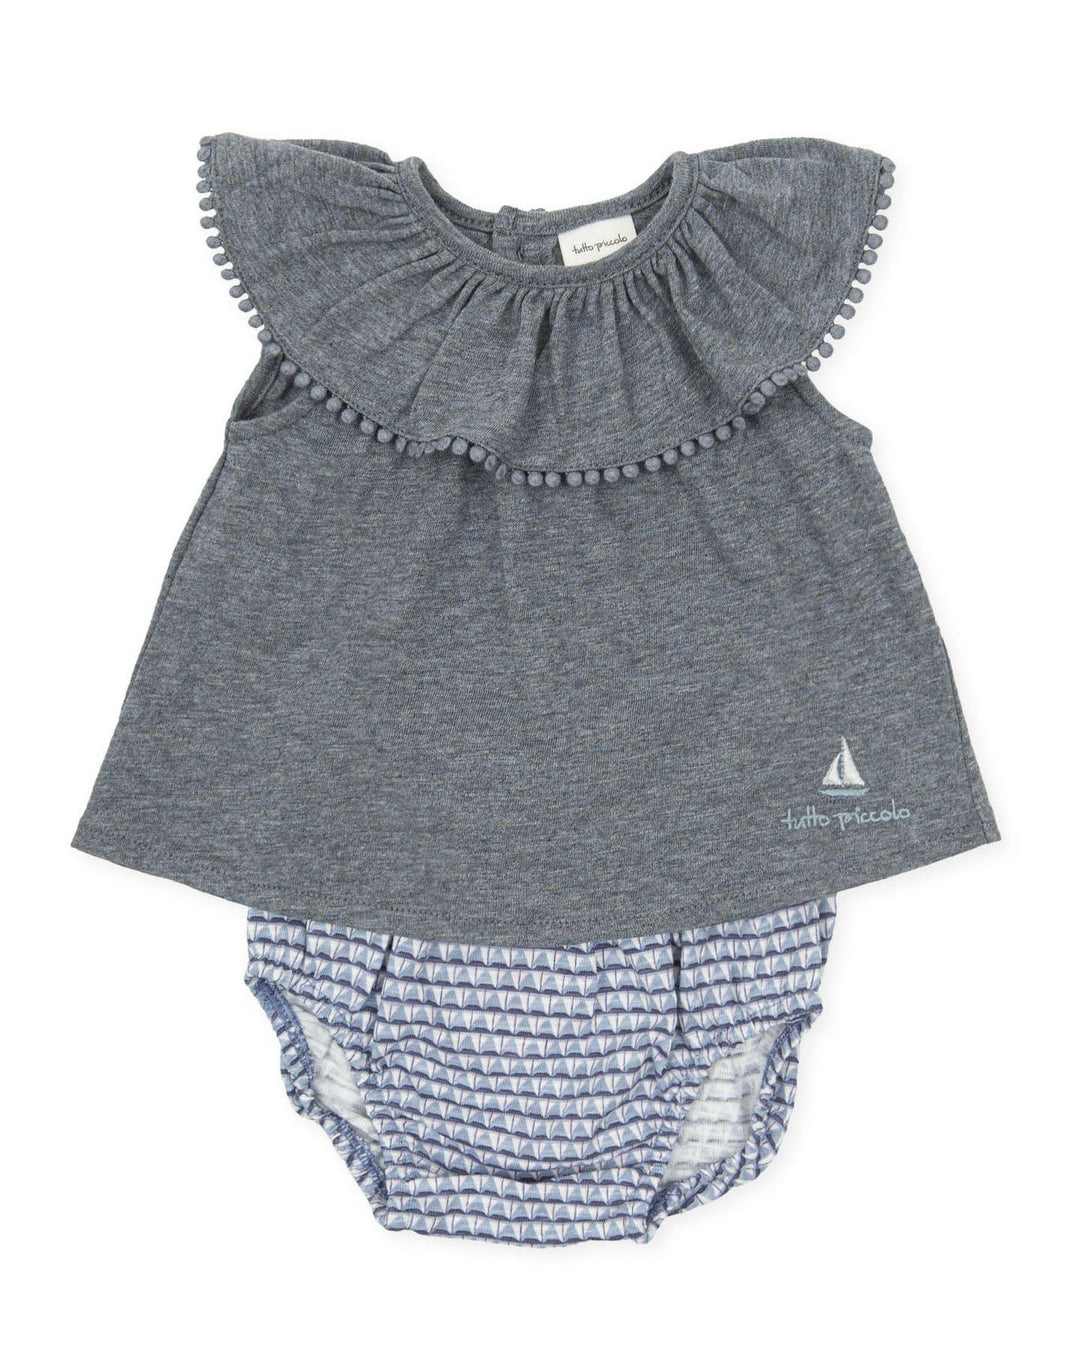 Tutto Piccolo "Maggie" Sailboat Print Bloomers & Blouse | Millie and John